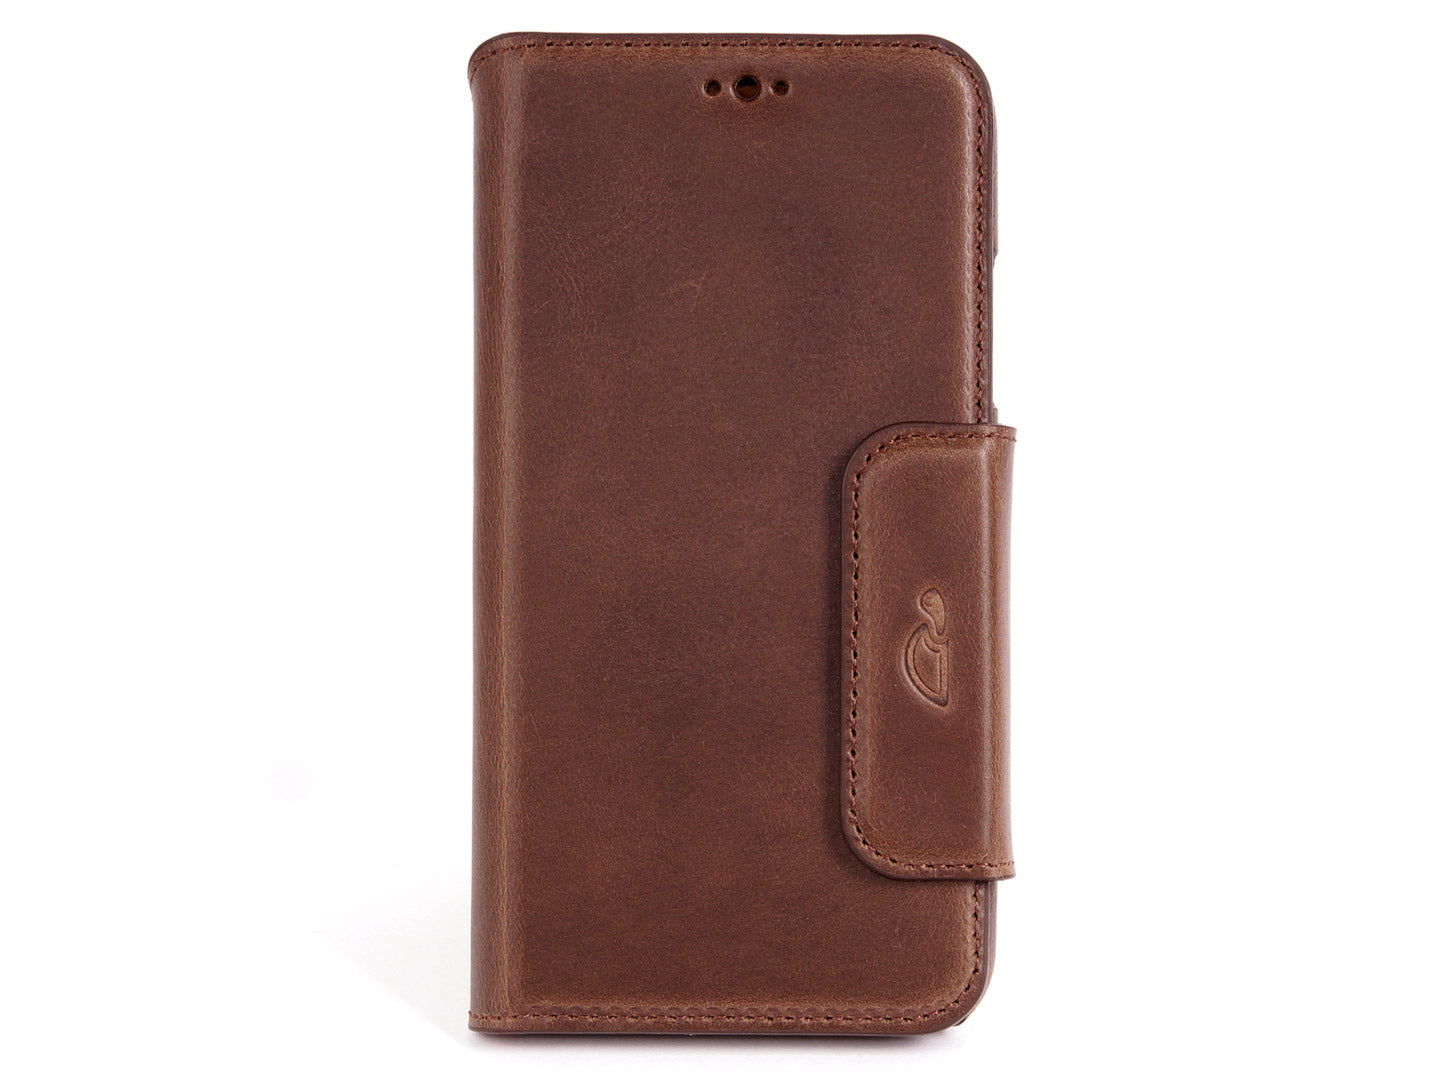 iPhone X leather wallet case - brown vintage leather - card slots - front - Carapaz